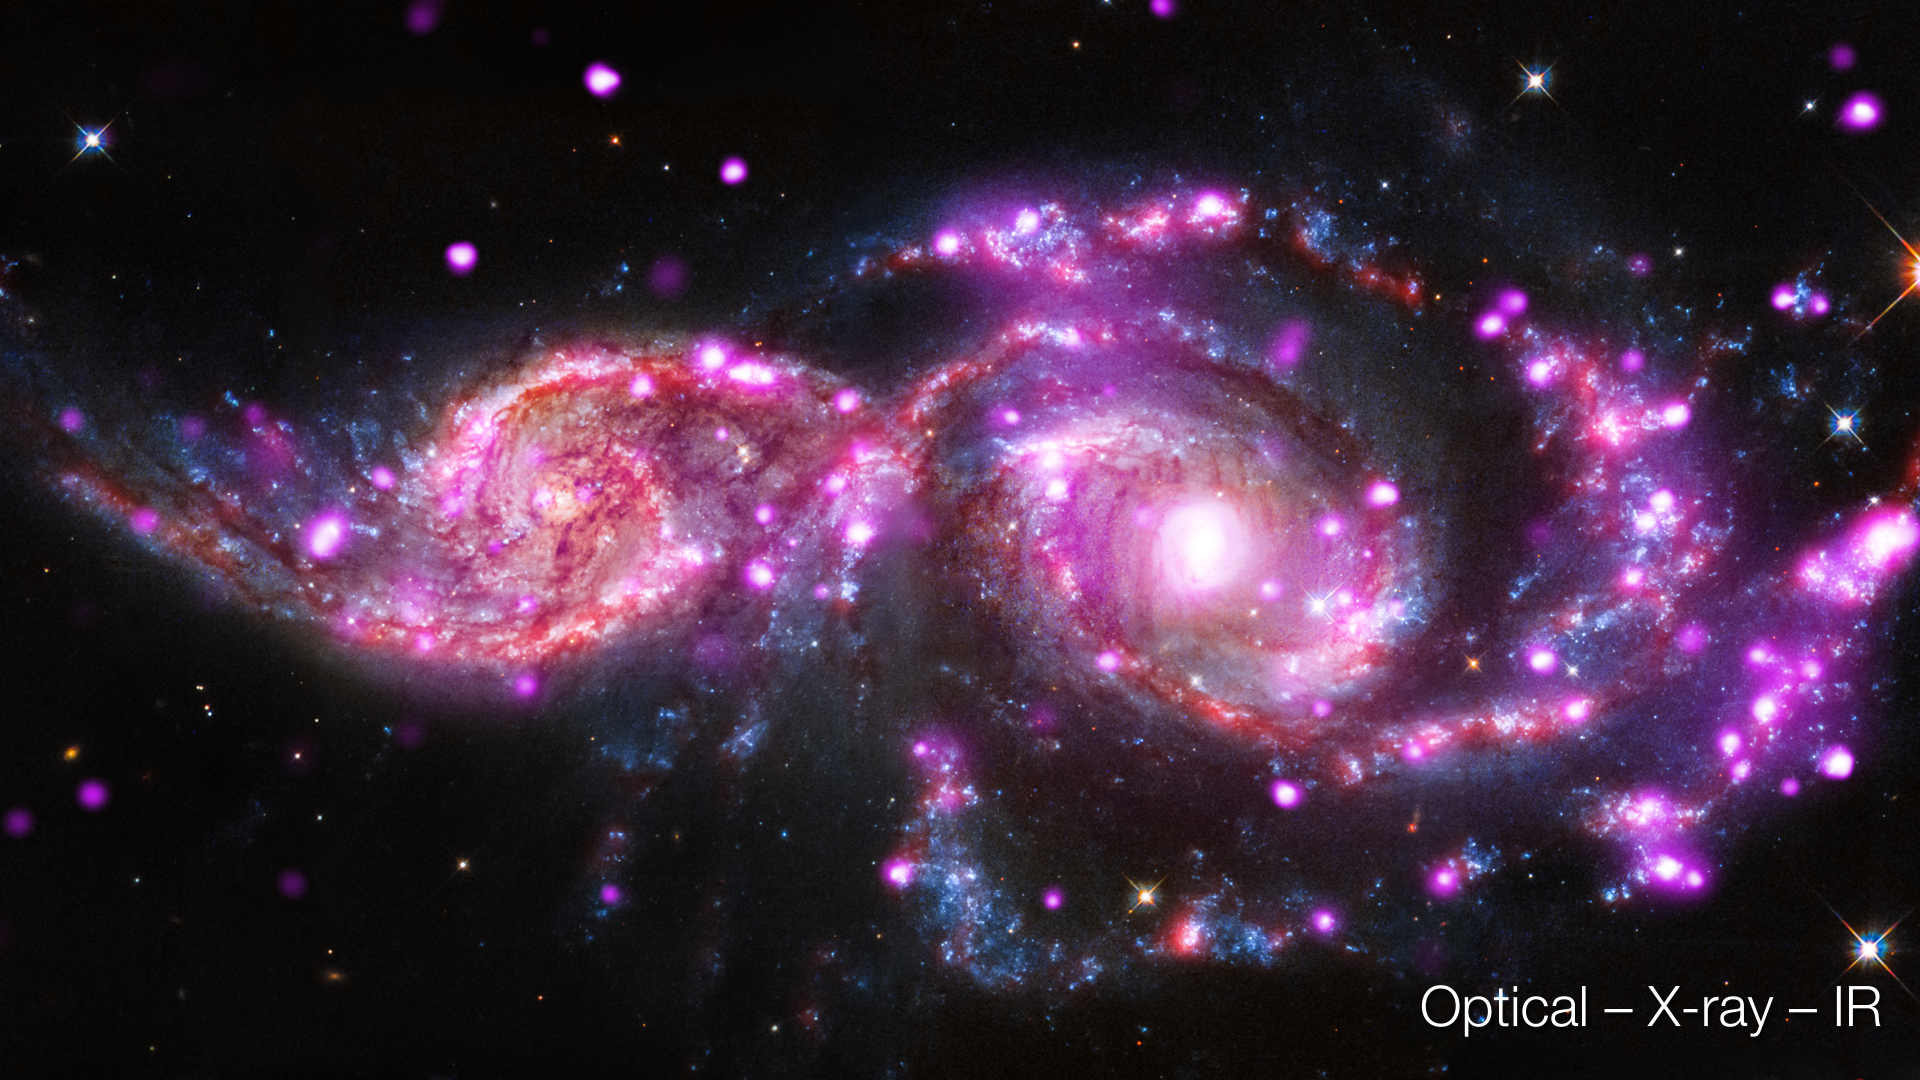 Visible (Optical), Infrared and X-ray image of the Colliding Galaxy.